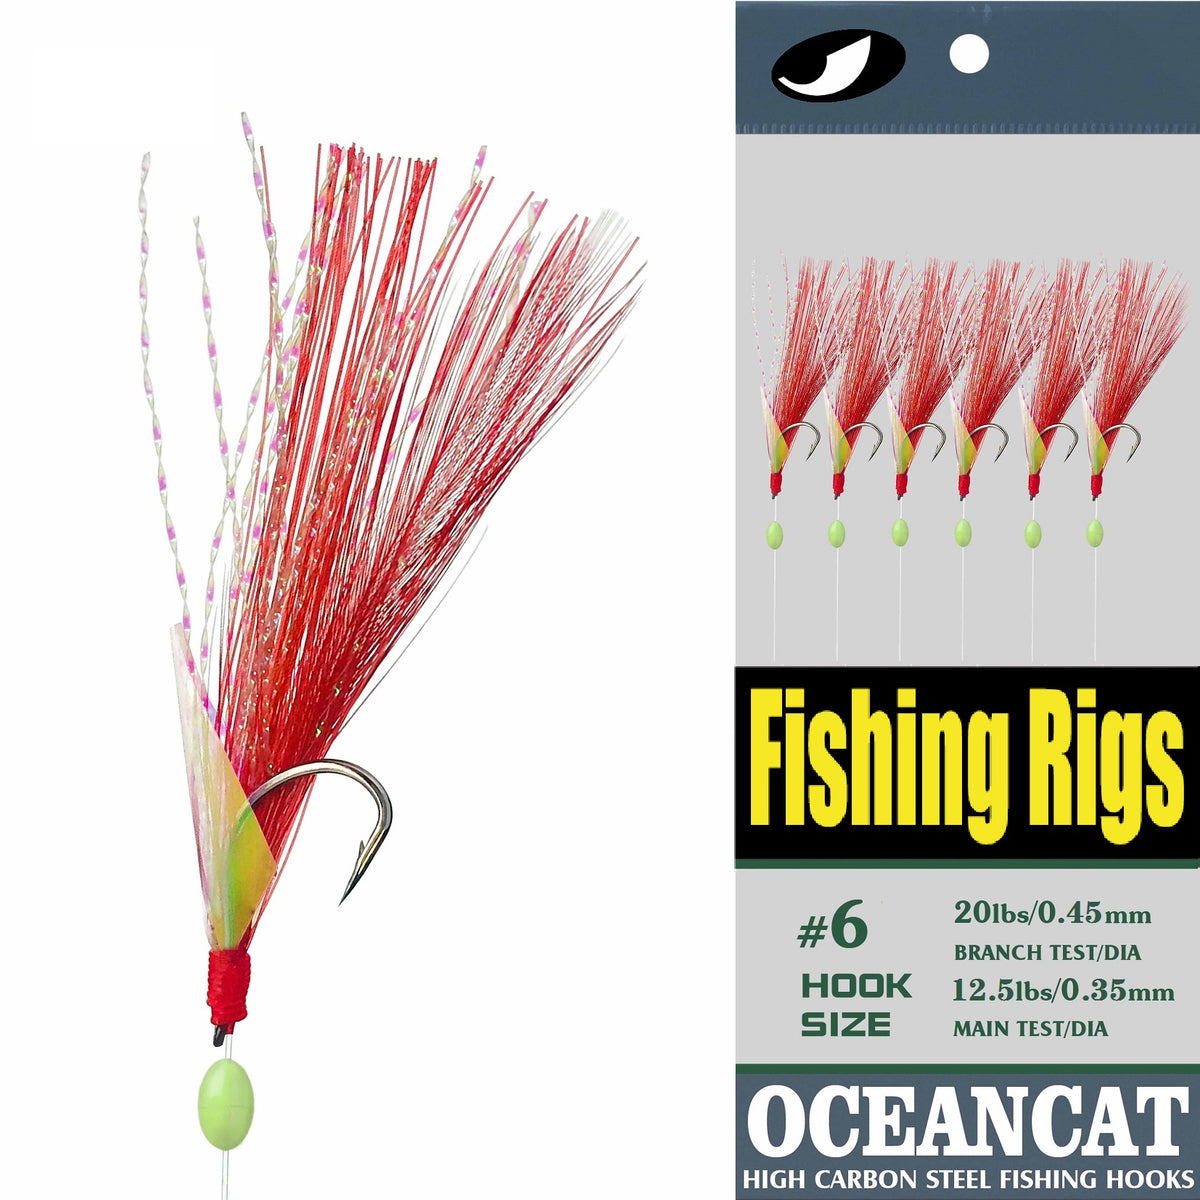 OCEAN CAT 10 Packs Red Feather Fishskin 6 Hooks Fishing Rigs with String  Hooks Glow Fishing Beads High Carbon Hooks for Freshwater Saltwater Fishing  Lures Bait Rig Tackle — OCEAN CAT Fishing Tackle